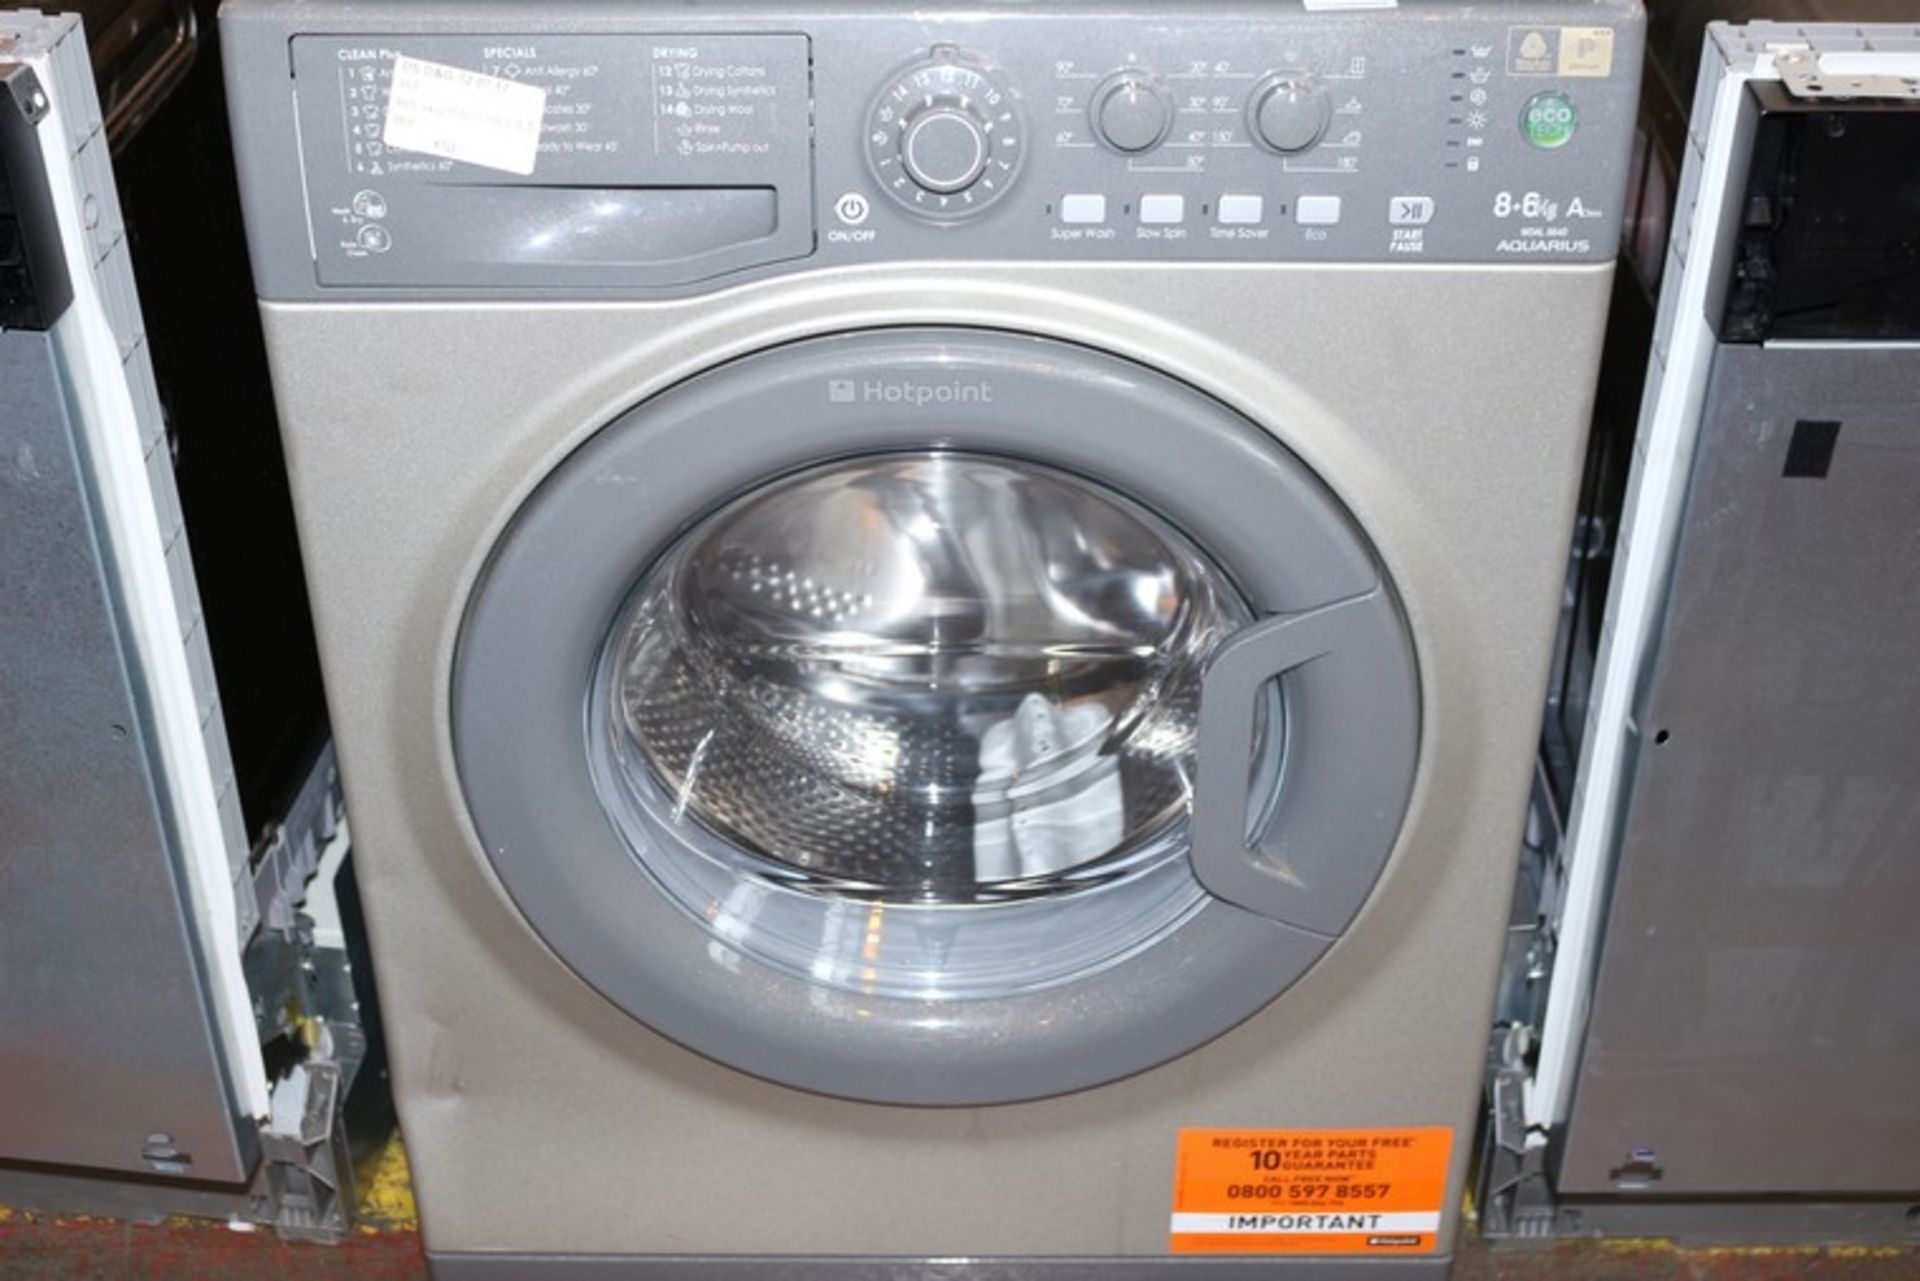 1 x HOTPOINT 6-8KG A CLASS WASHING MACHINE RRP £300 (12.7.17) *PLEASE NOTE THAT THE BID PRICE IS